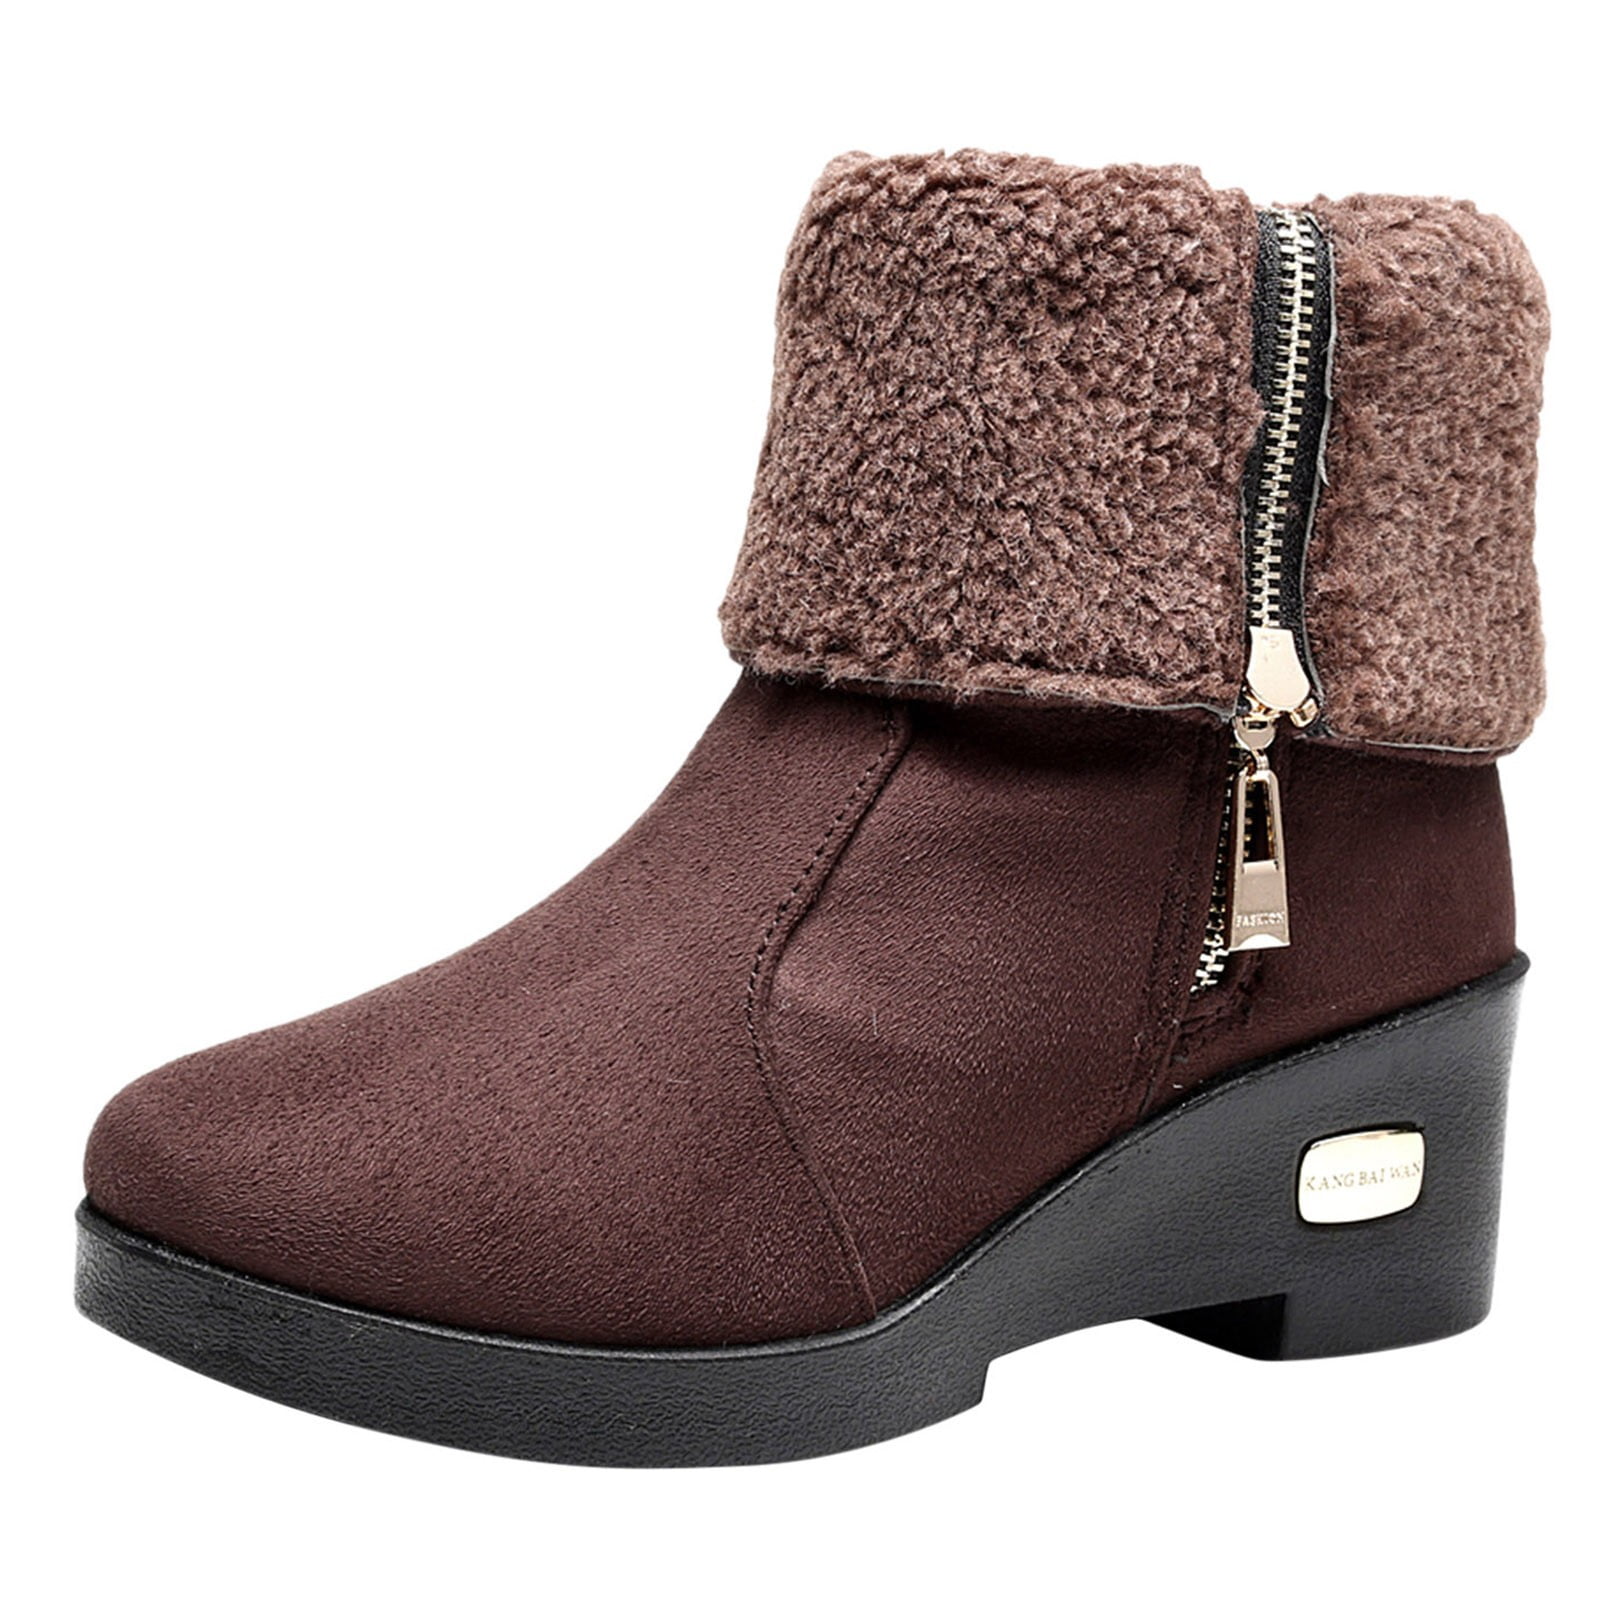 11 Snow Boot Outfits That Are Actually Cute